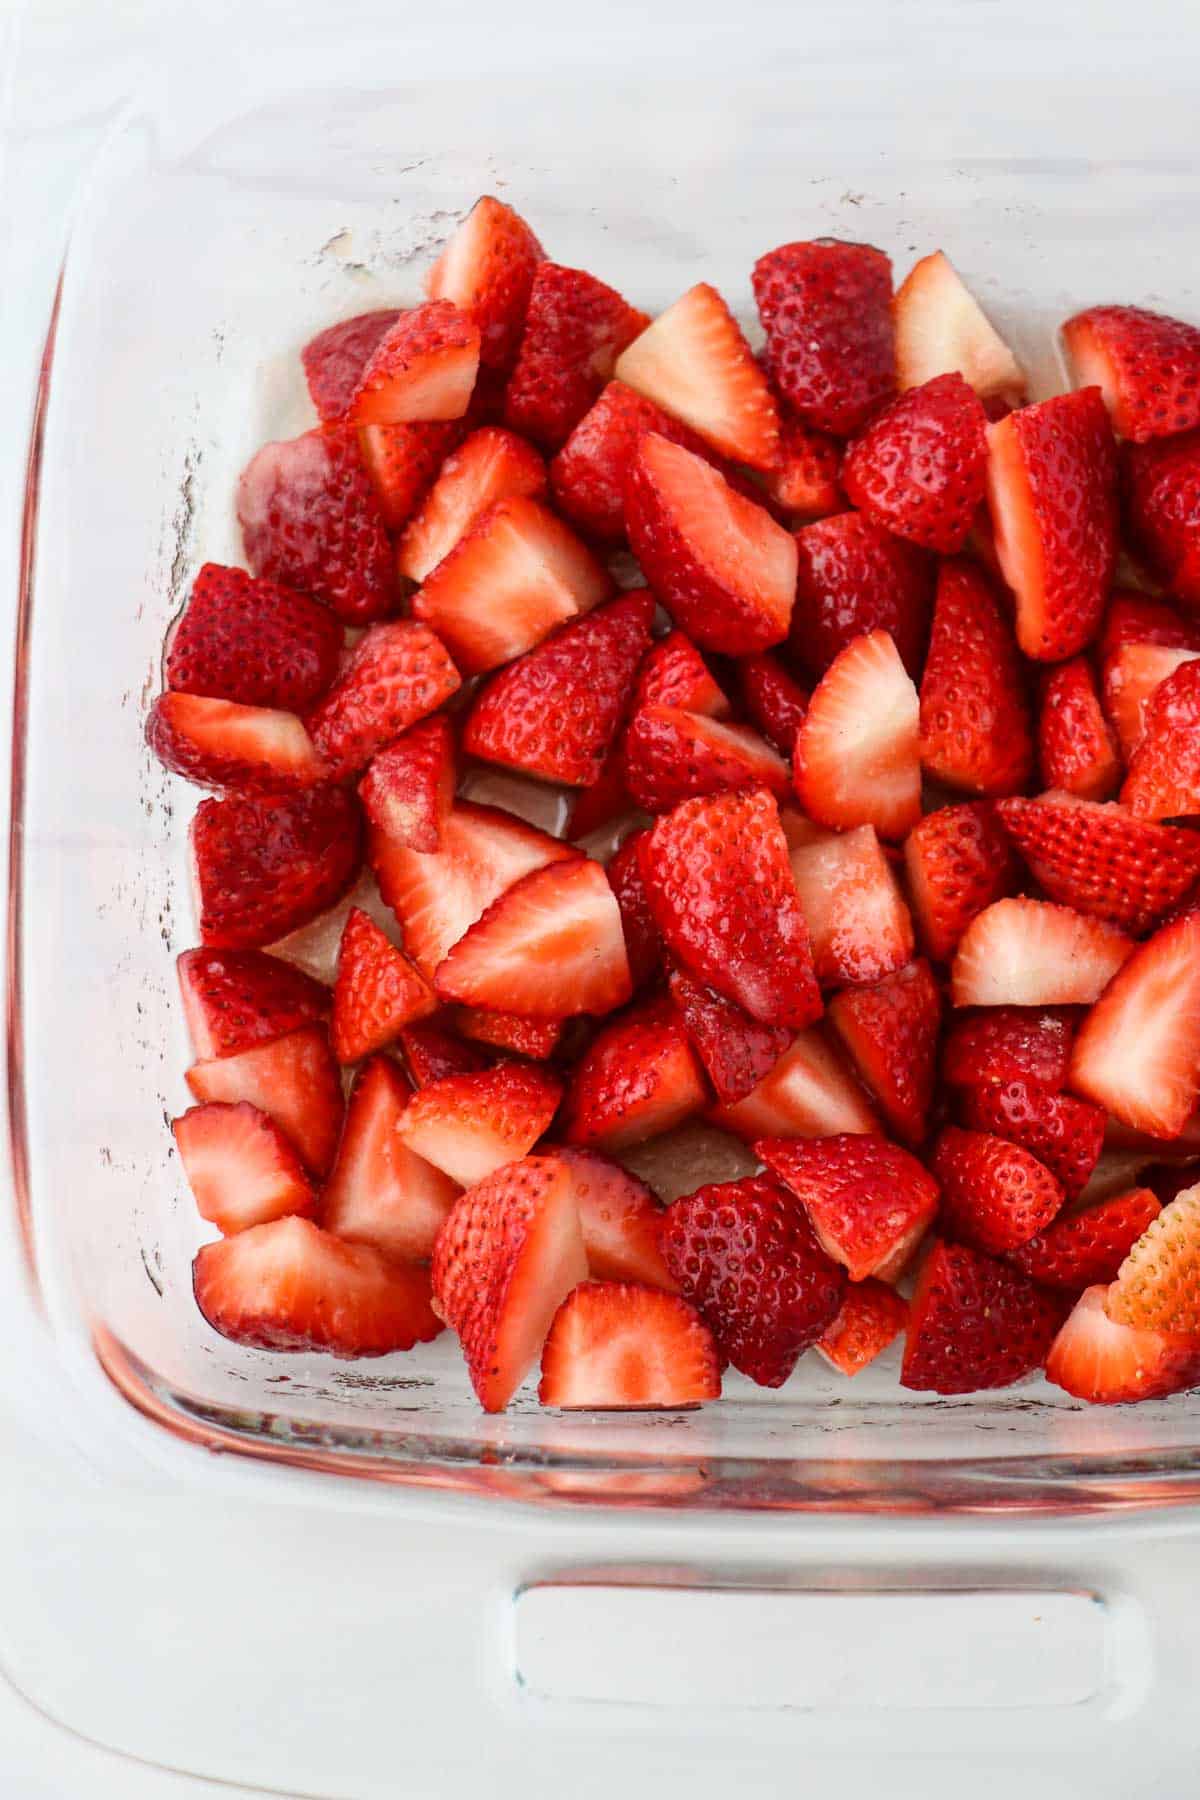 Quartered strawberries in a glass dish.